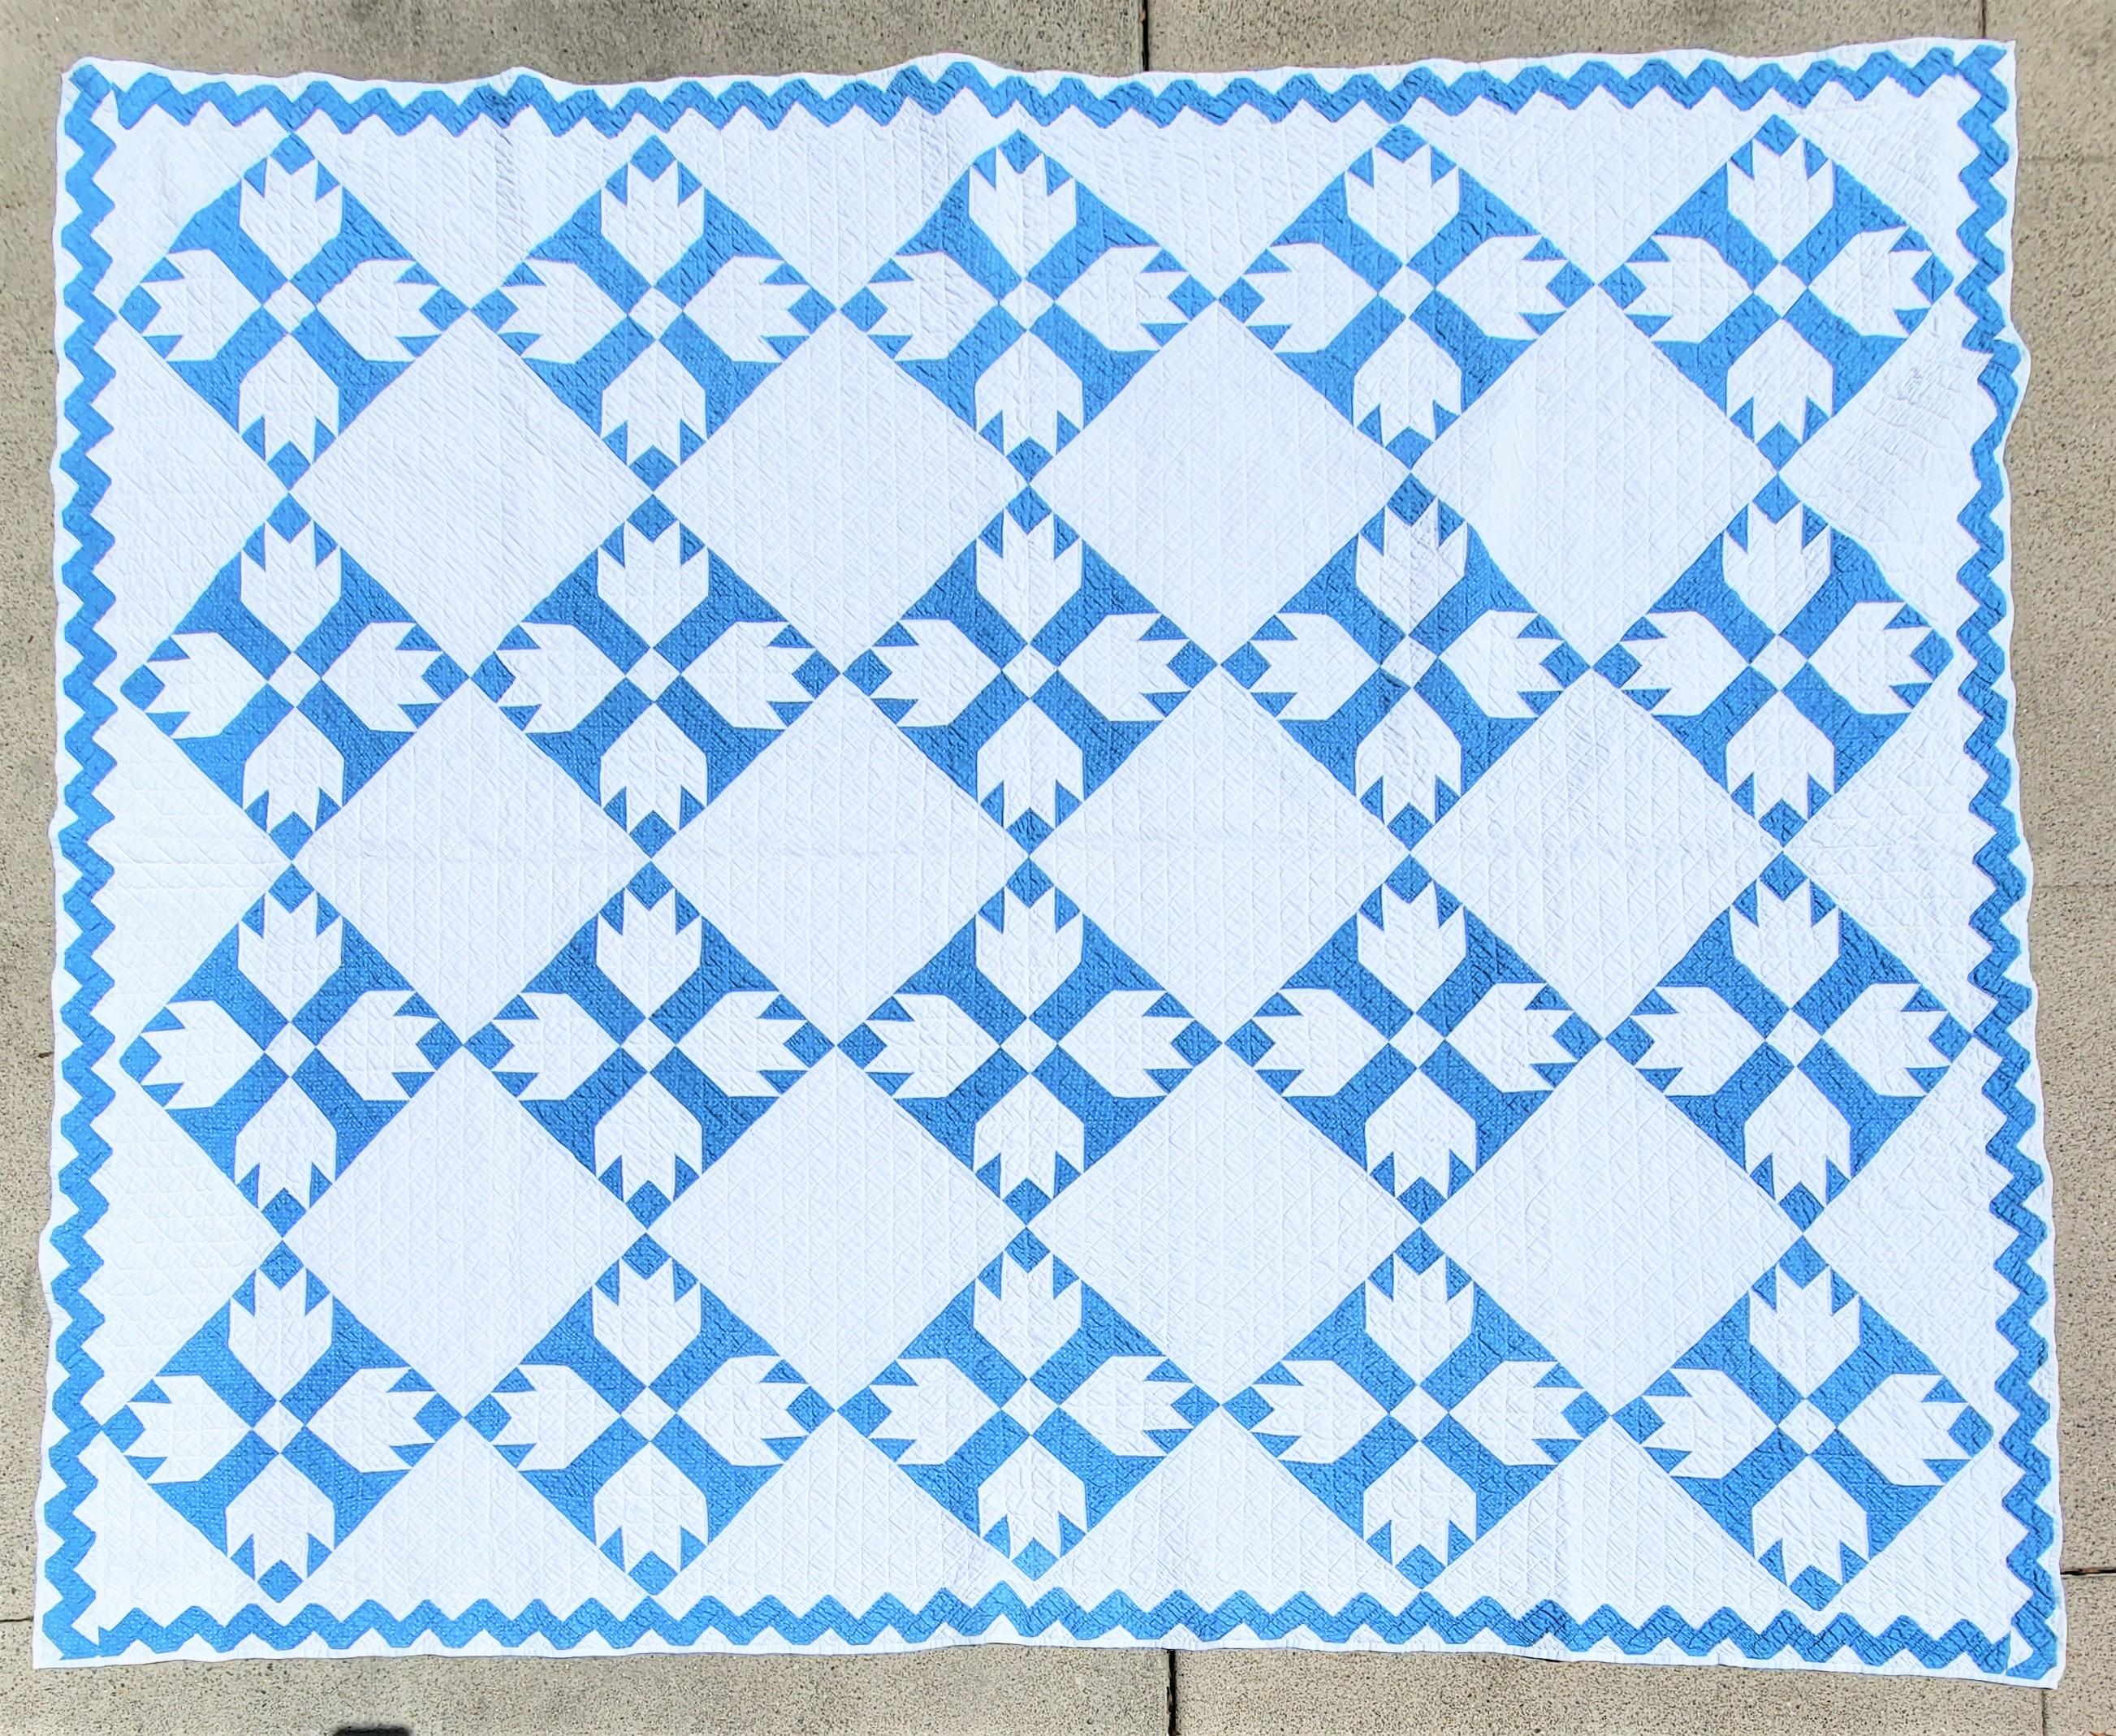 Hand-Crafted 19thc Robin Egg Blue Calico Bear Paw Quilt For Sale